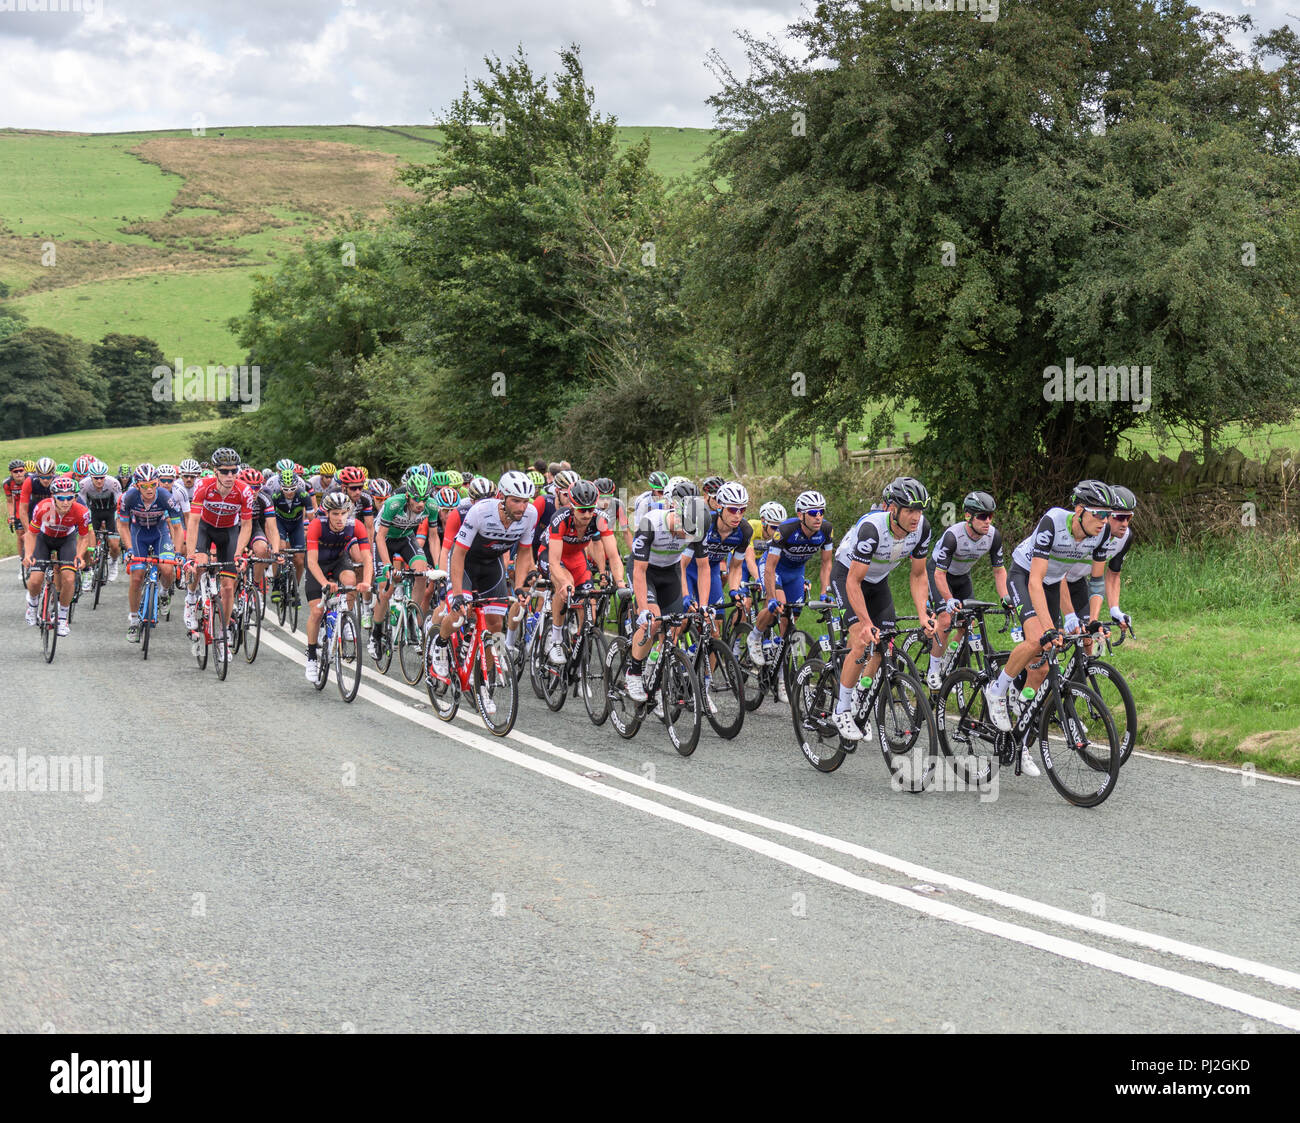 2016 Tour of Britain cyclists riding towards Macclesfield, Cheshire Stock Photo